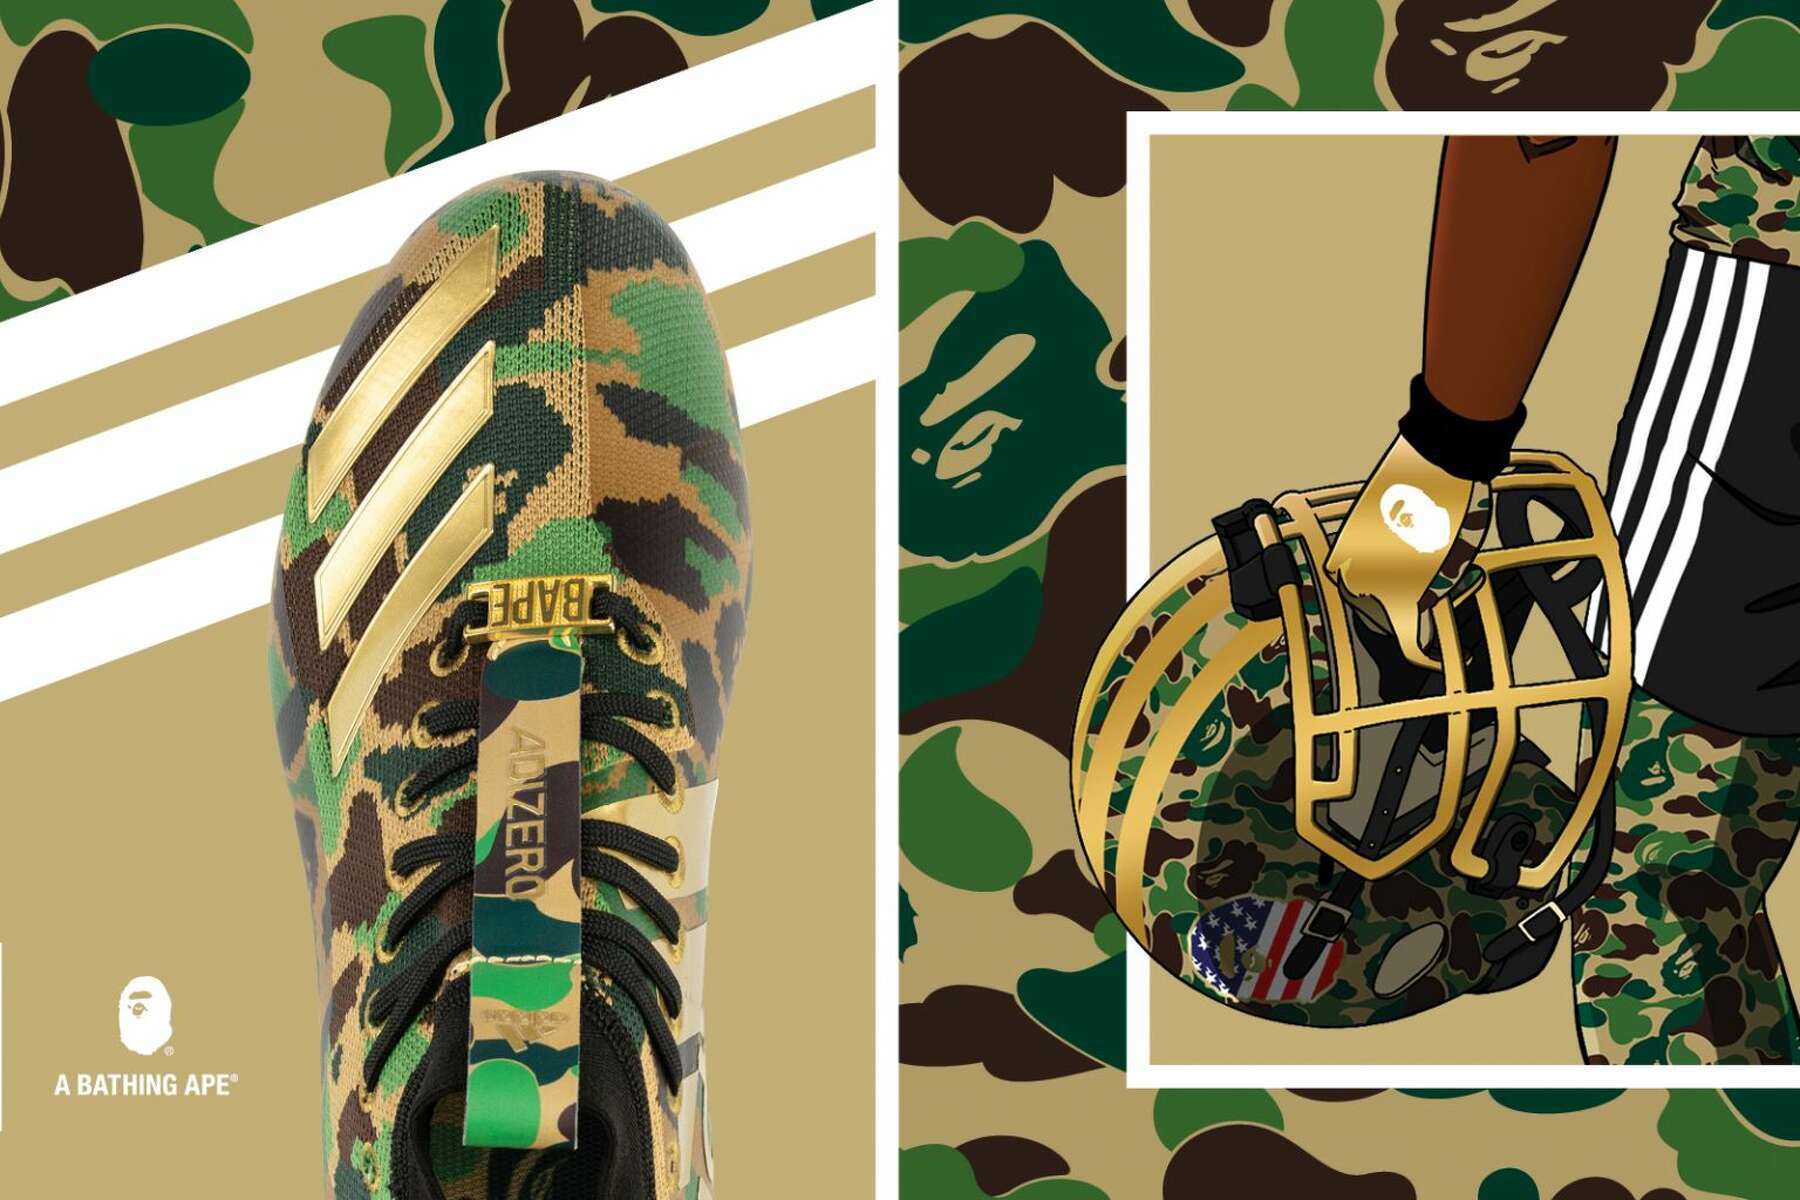 Sometimes sometimes Meekness short The adidas x BAPE Super Bowl collection is insane